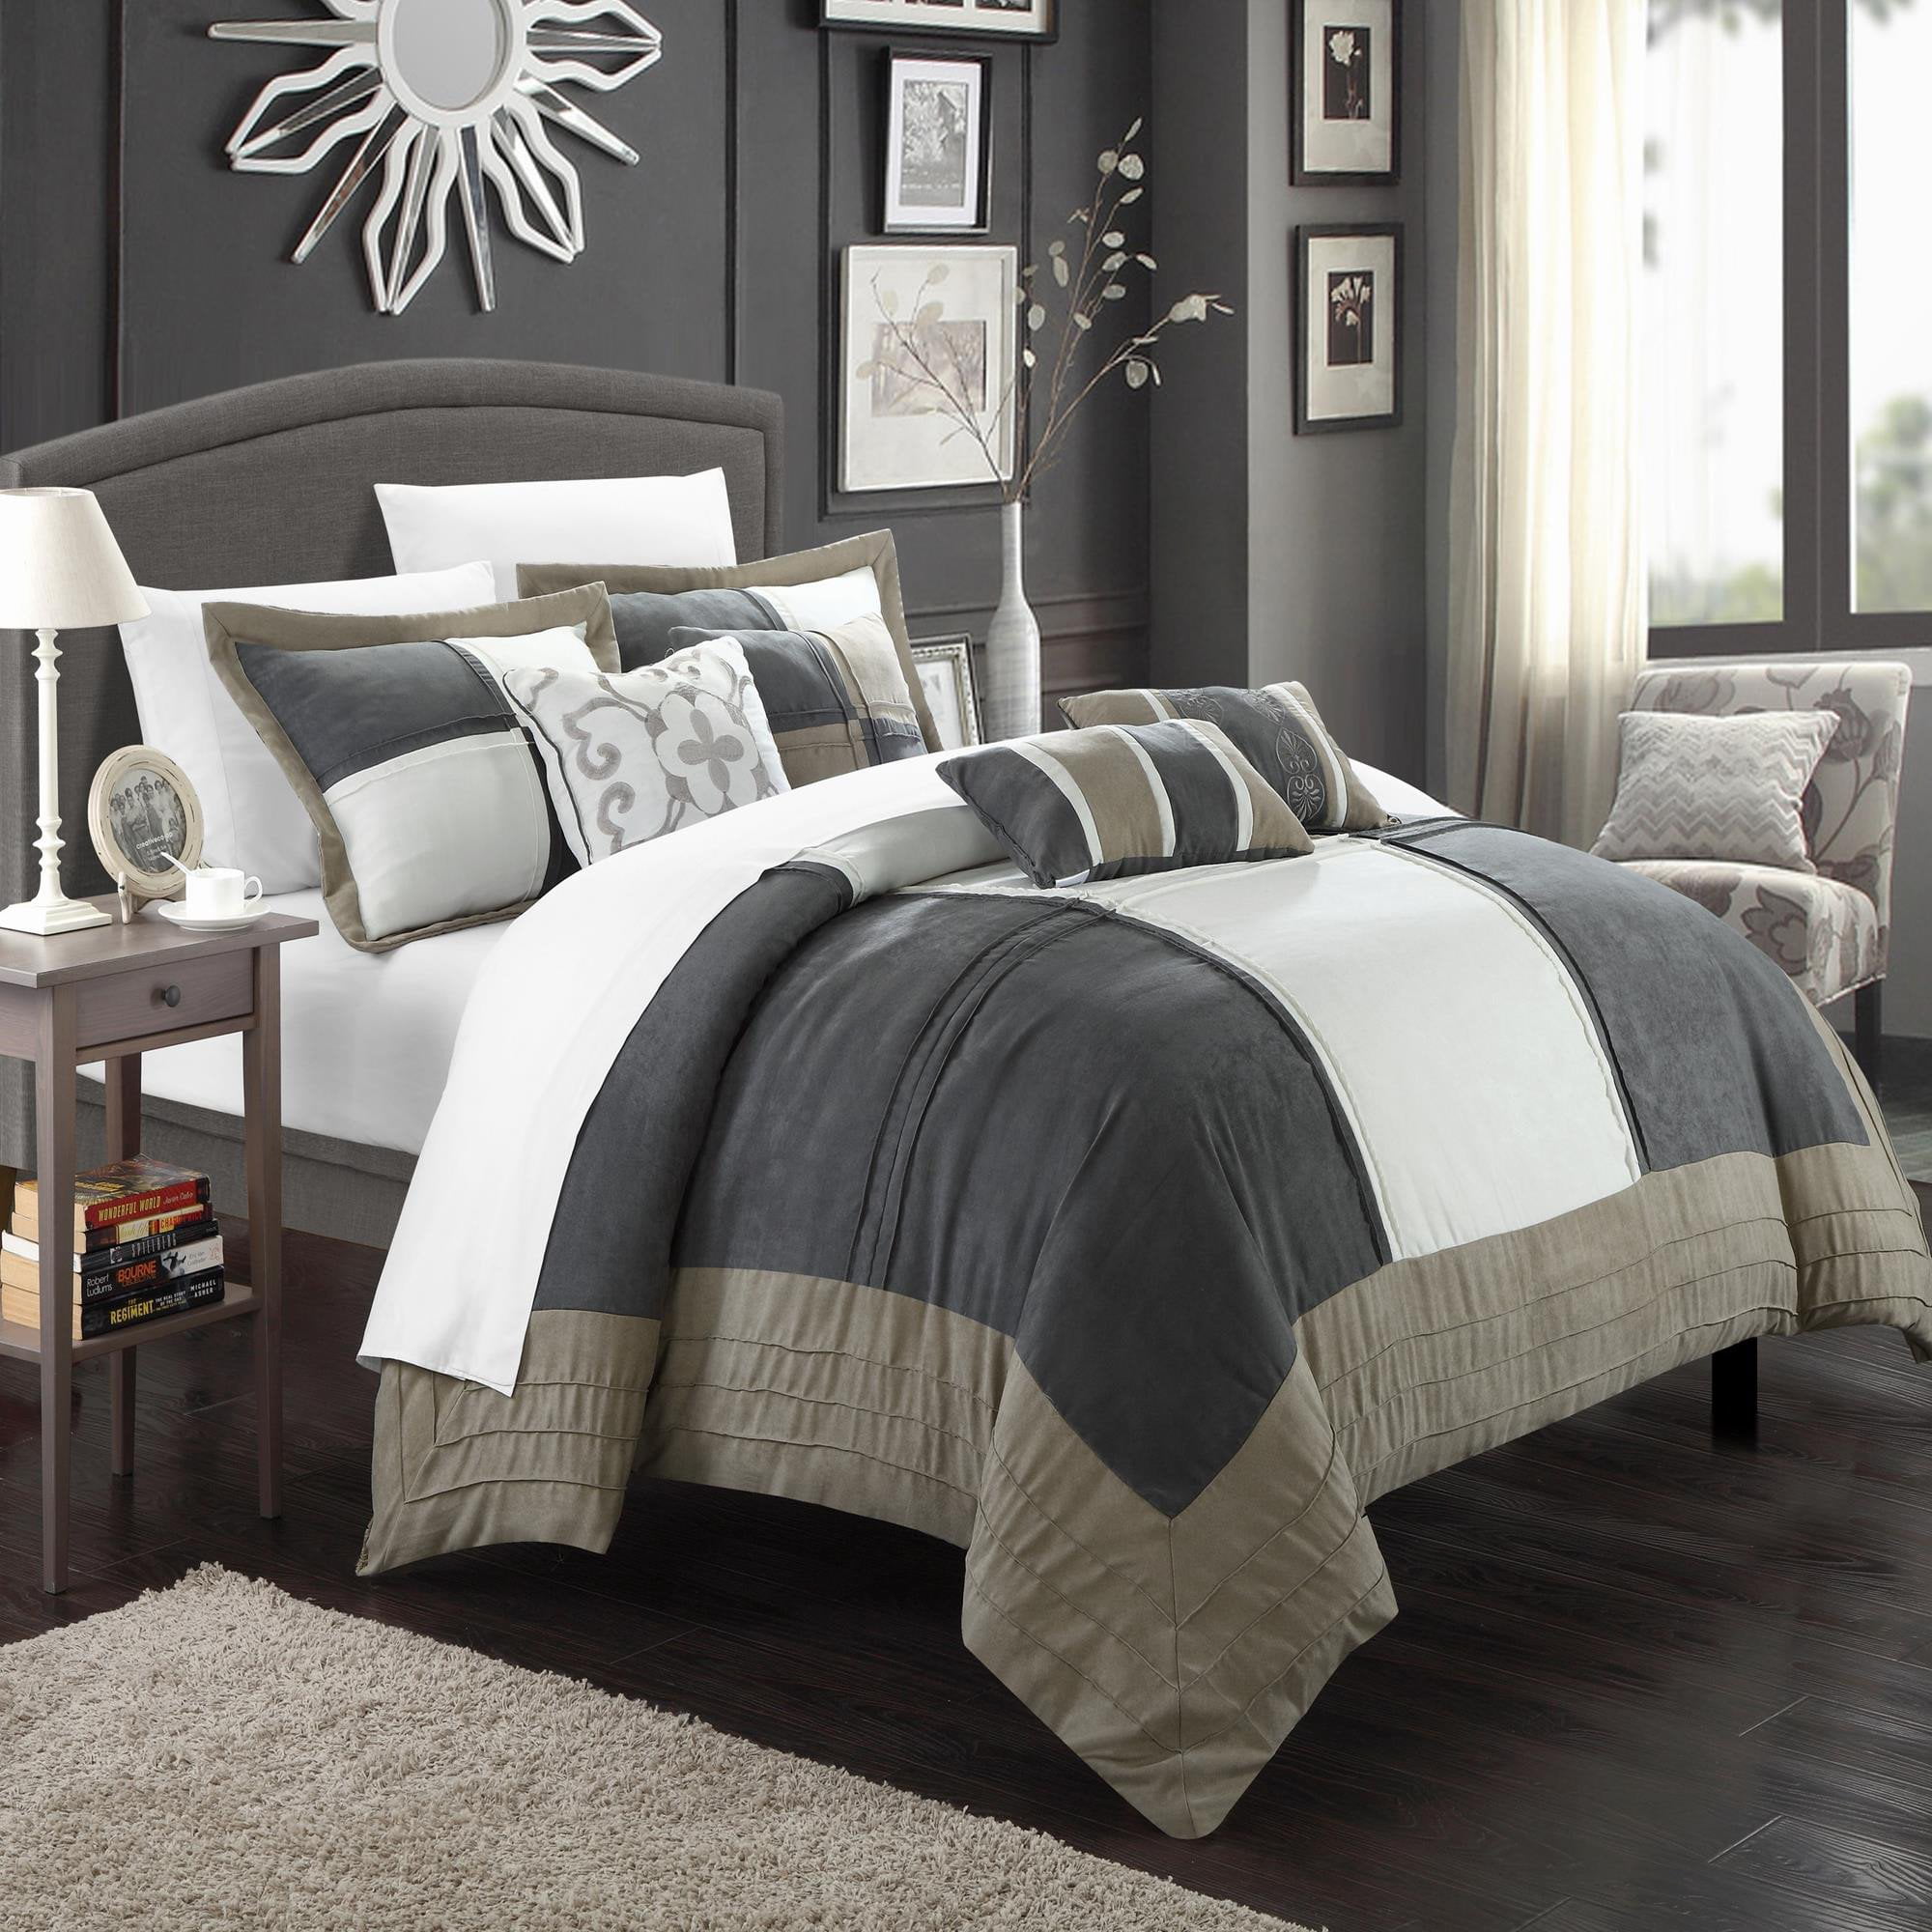 Includes Bed in A Bag Taupe/White Chic Home Lazio 7-Piece Soft Microsuede Patchwork Comforter Set 2-Sham and 4-Throw Pillow Queen